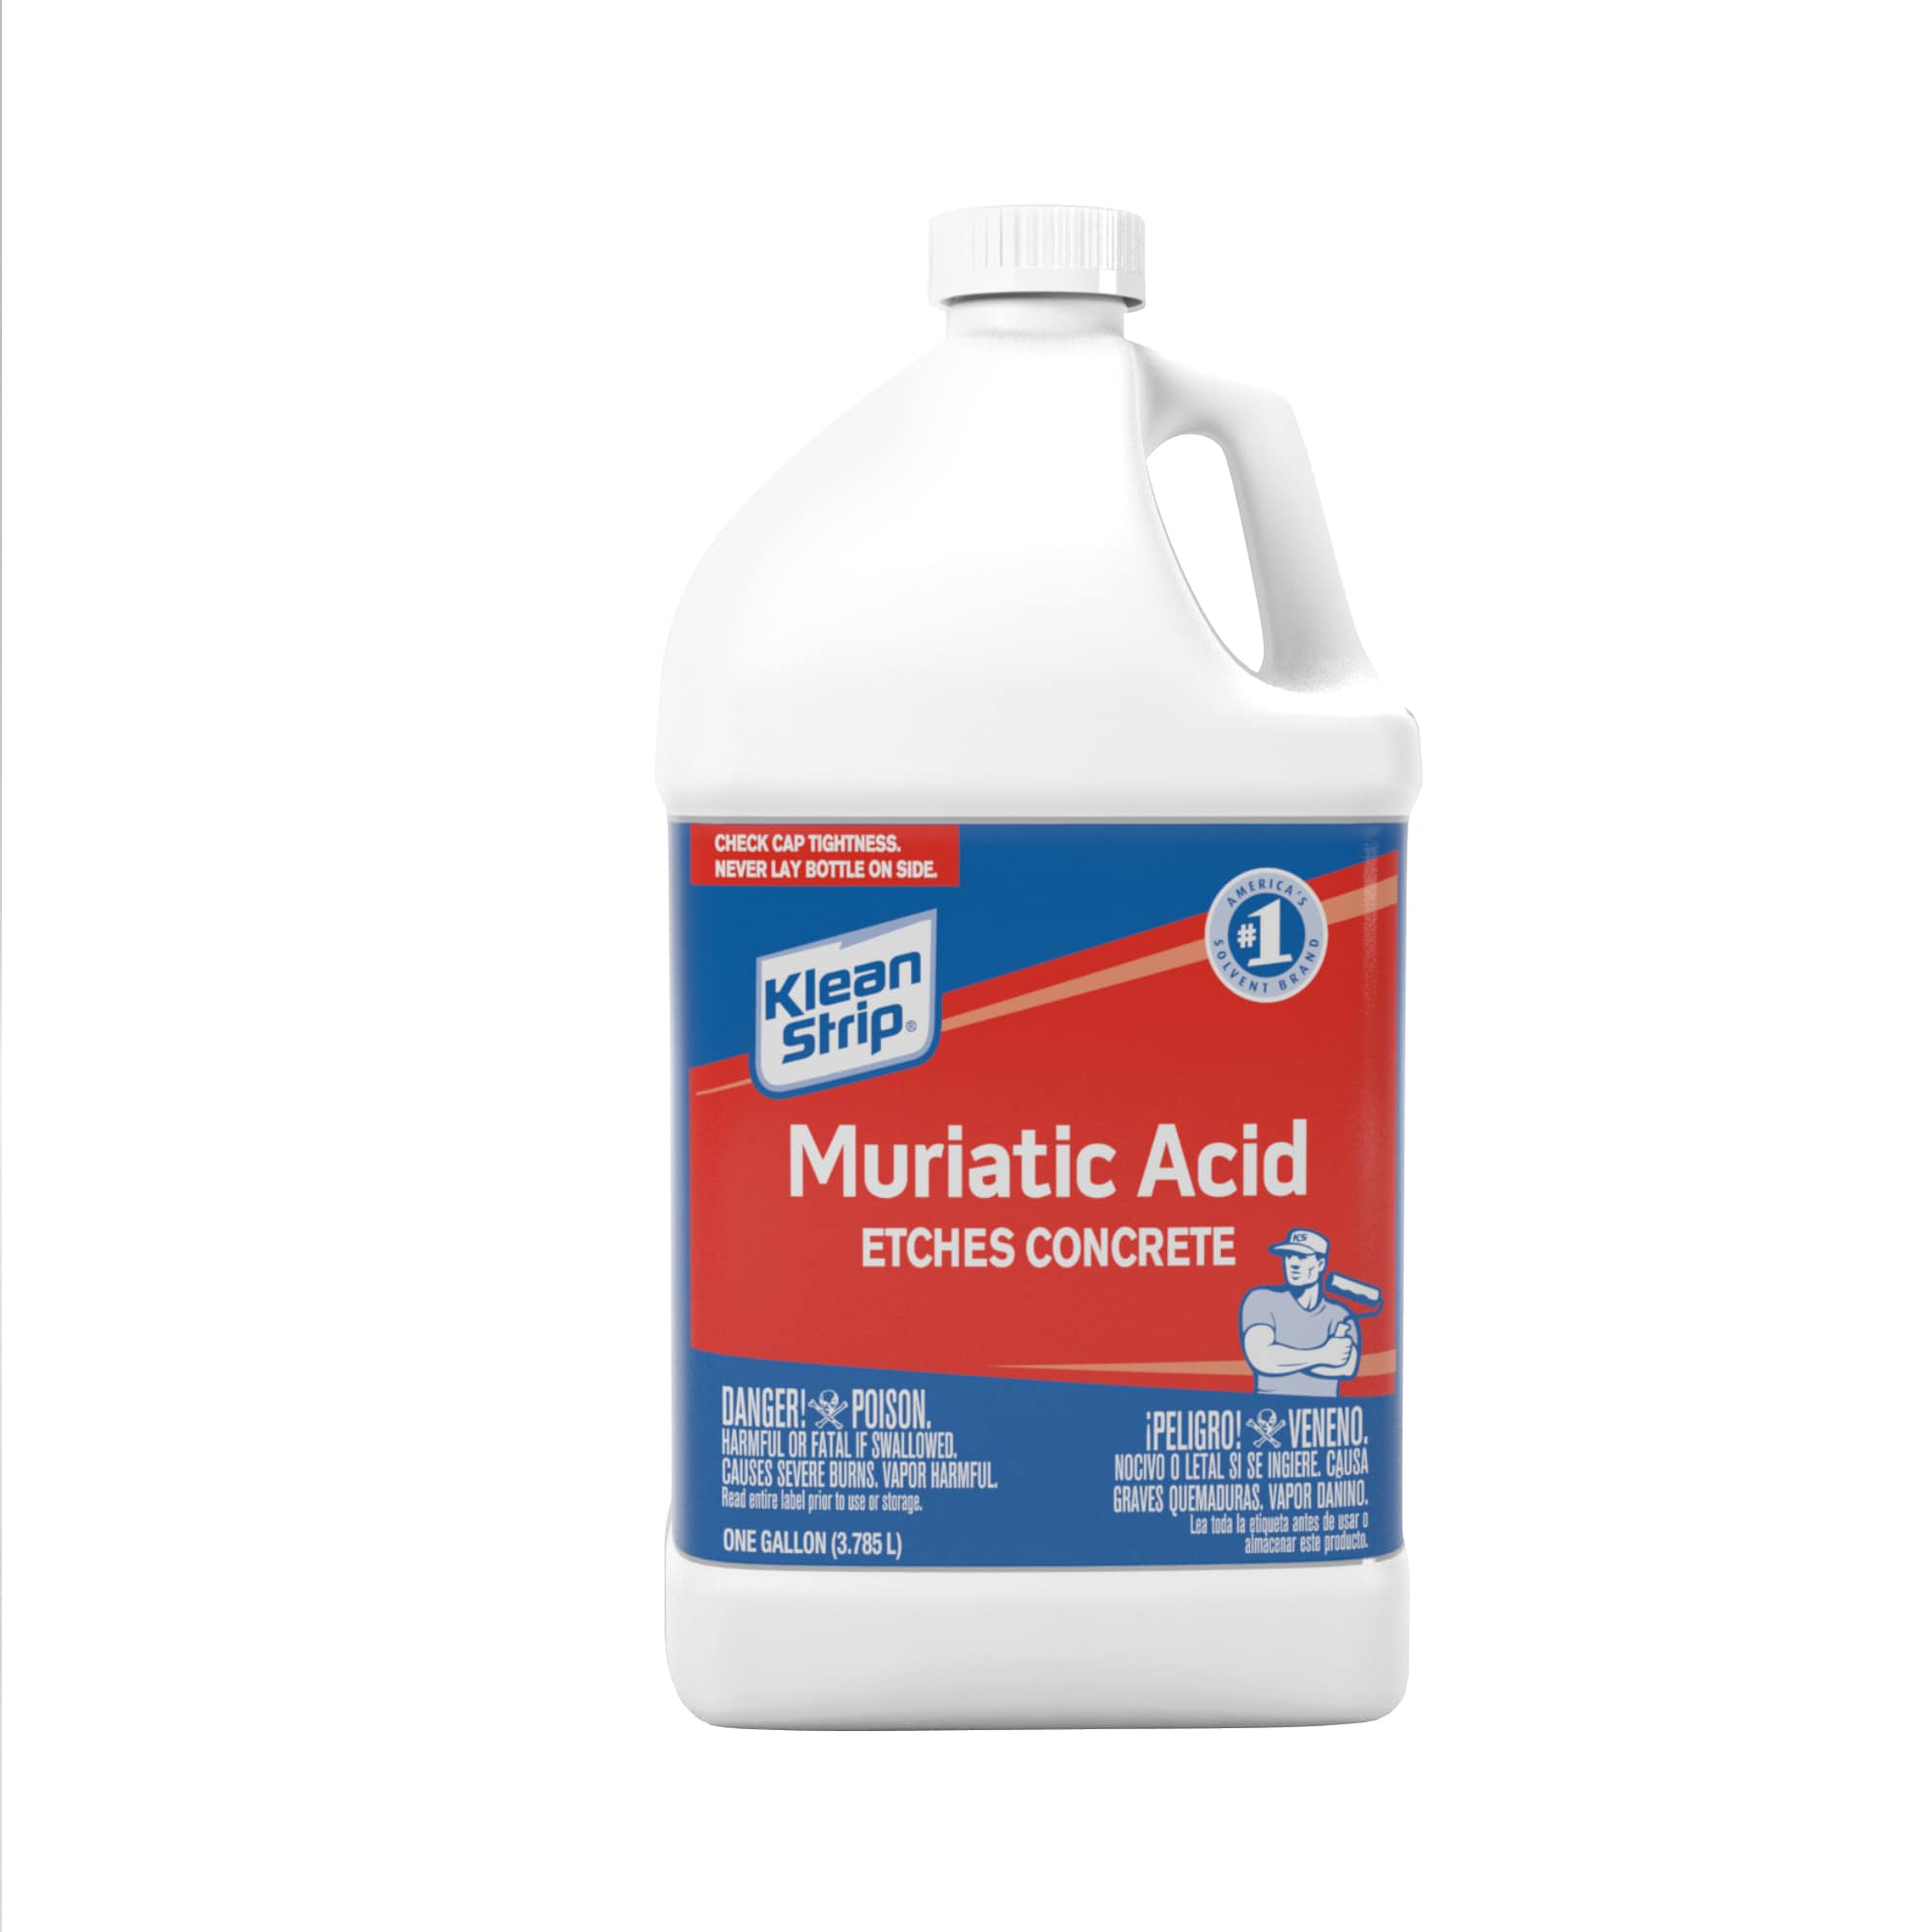 Tips to remove paint from concrete with muriatic acid.